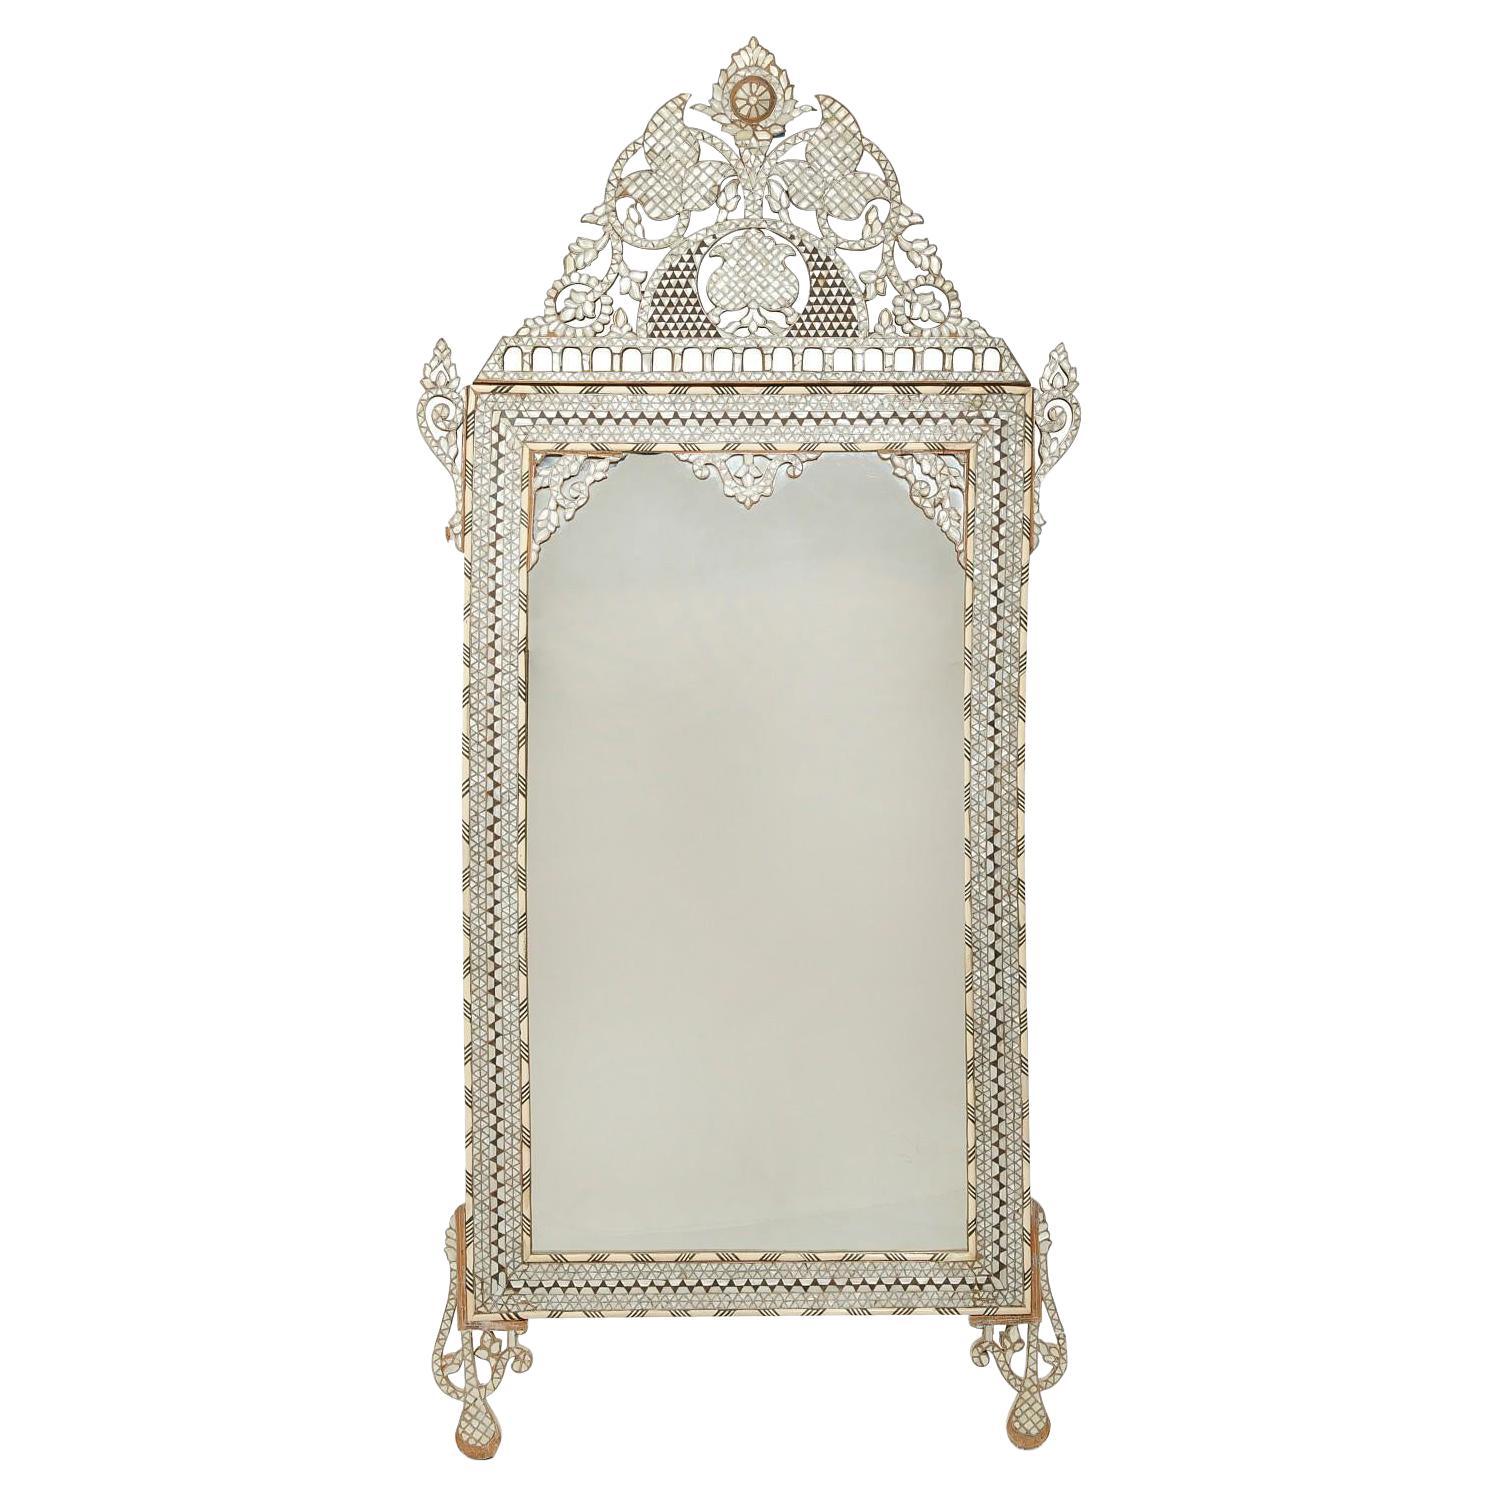 Levantine Mother Of Pearl Inlaid Mirror, Late 19th Century